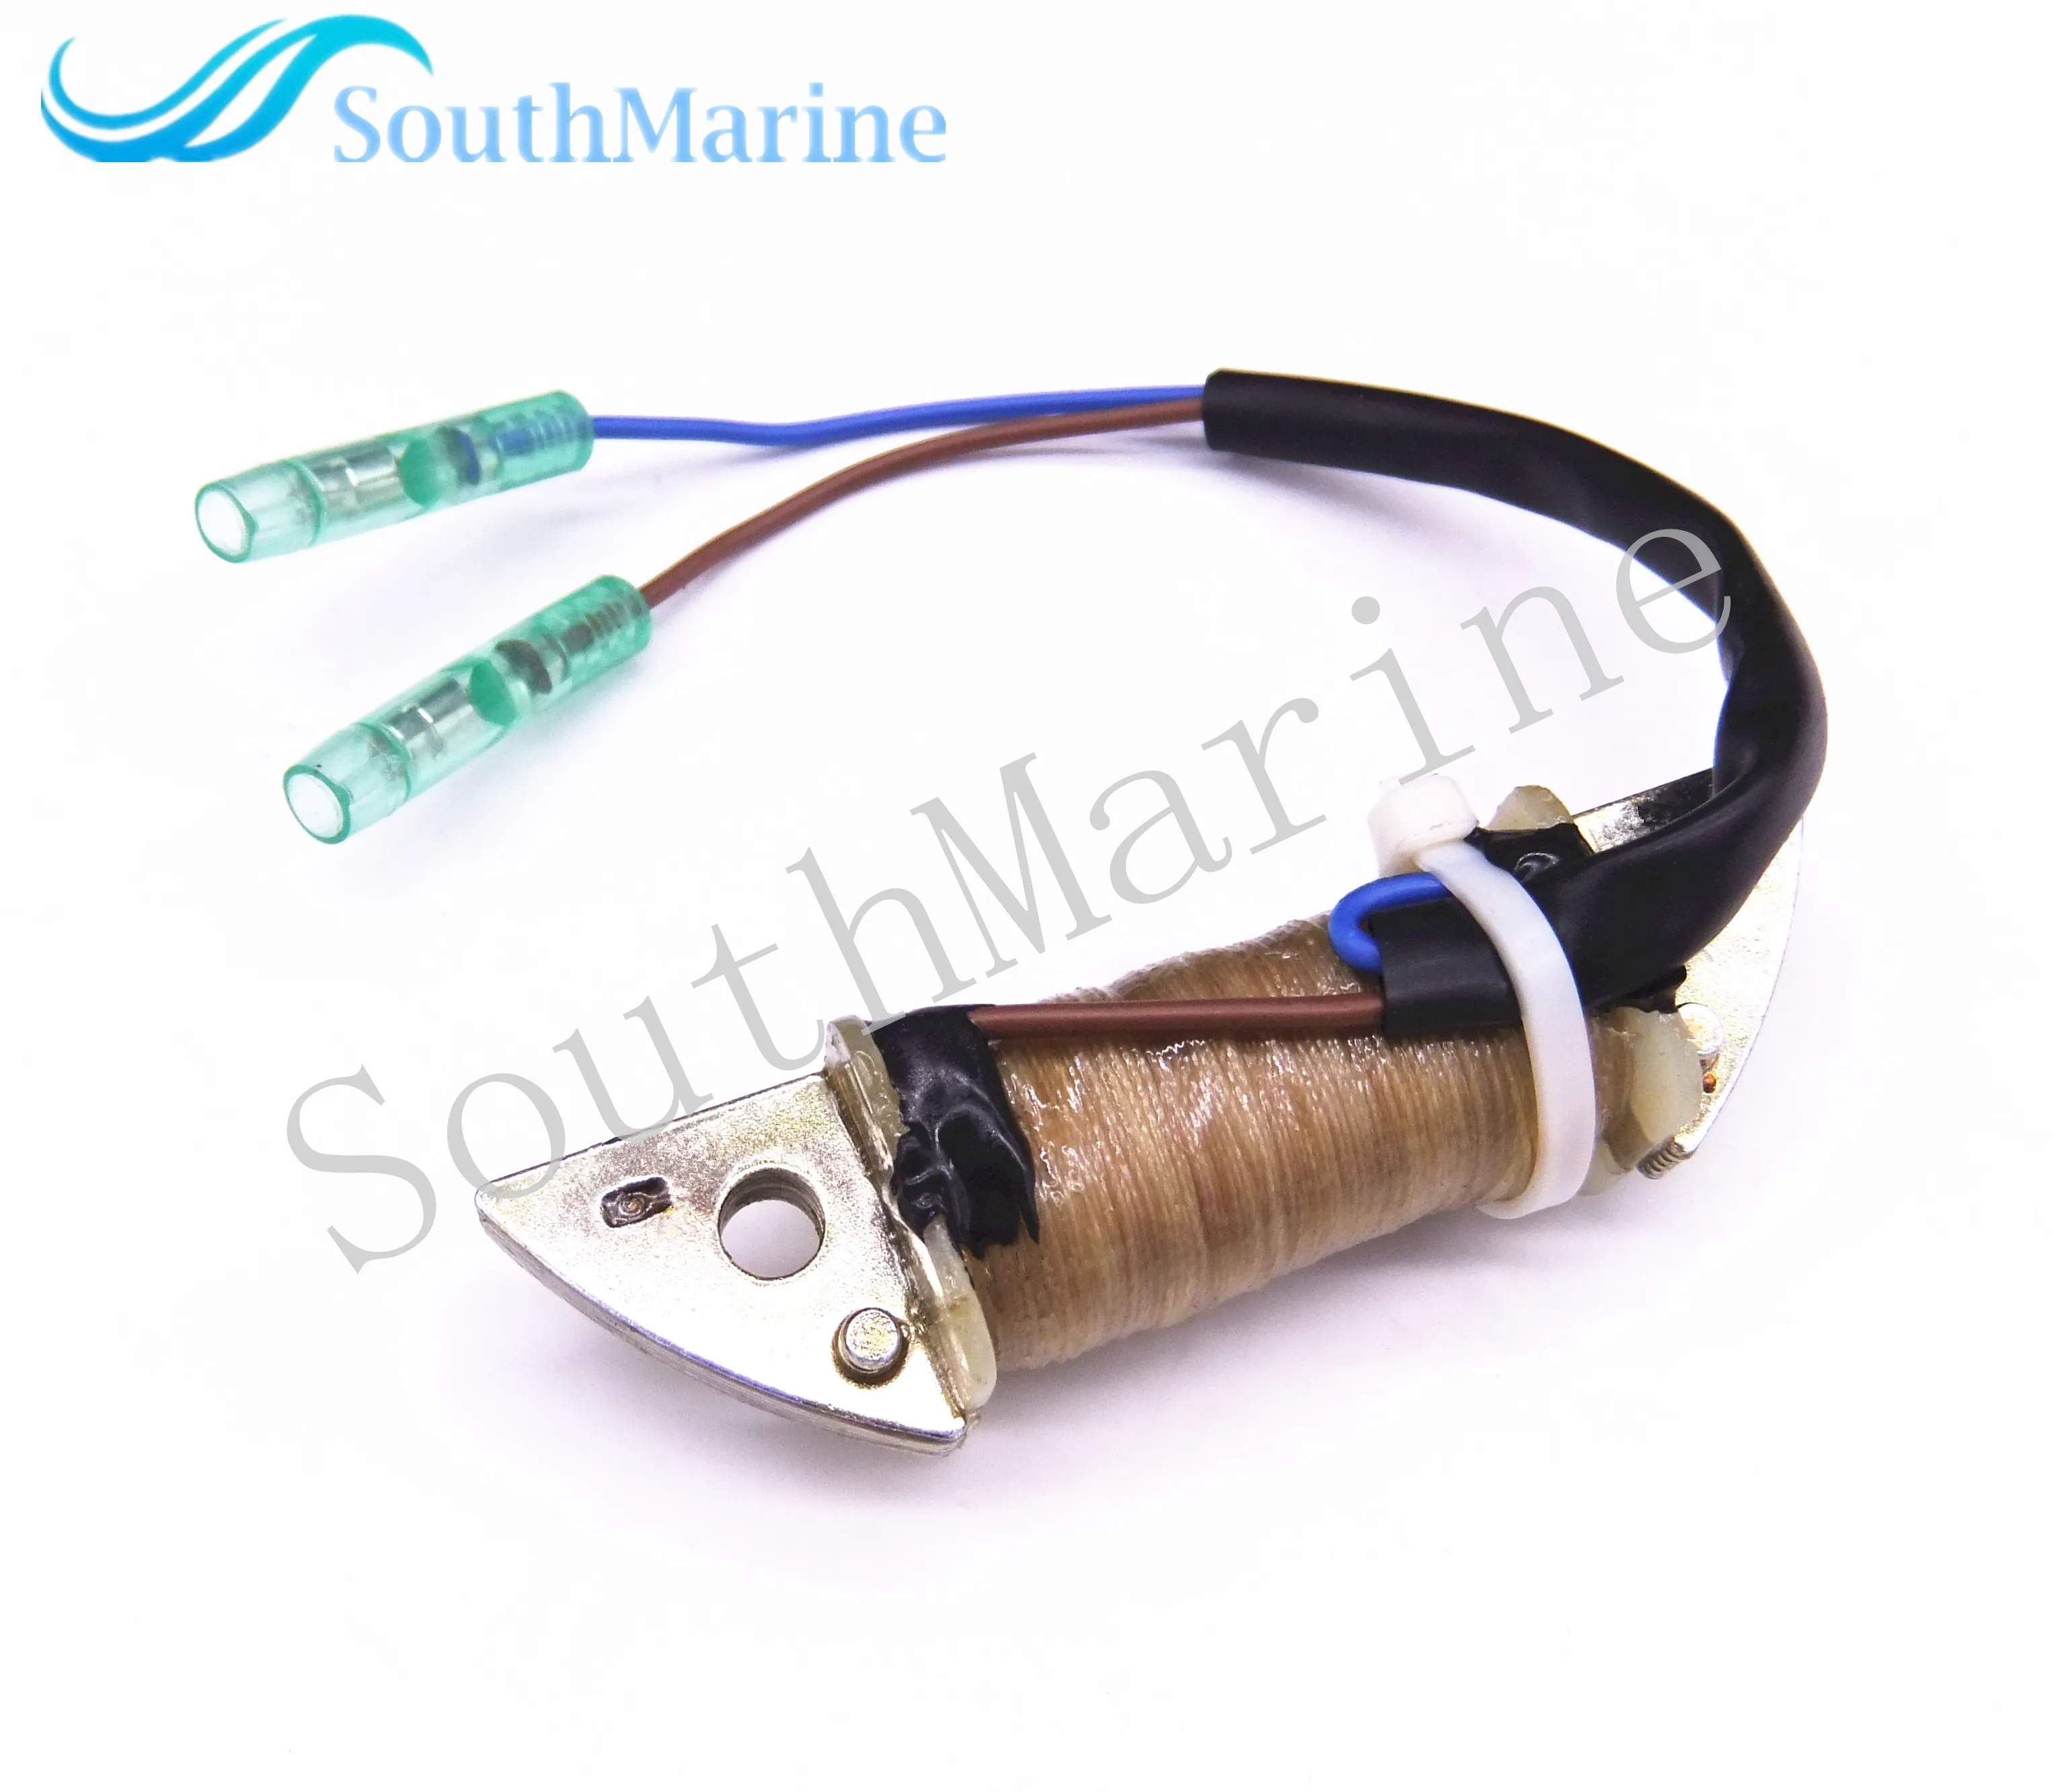 66M-85520-00 Charge Coil for Yamaha 9.9HP 15HP T9.9 F9.9 F15 Outboard Engine 